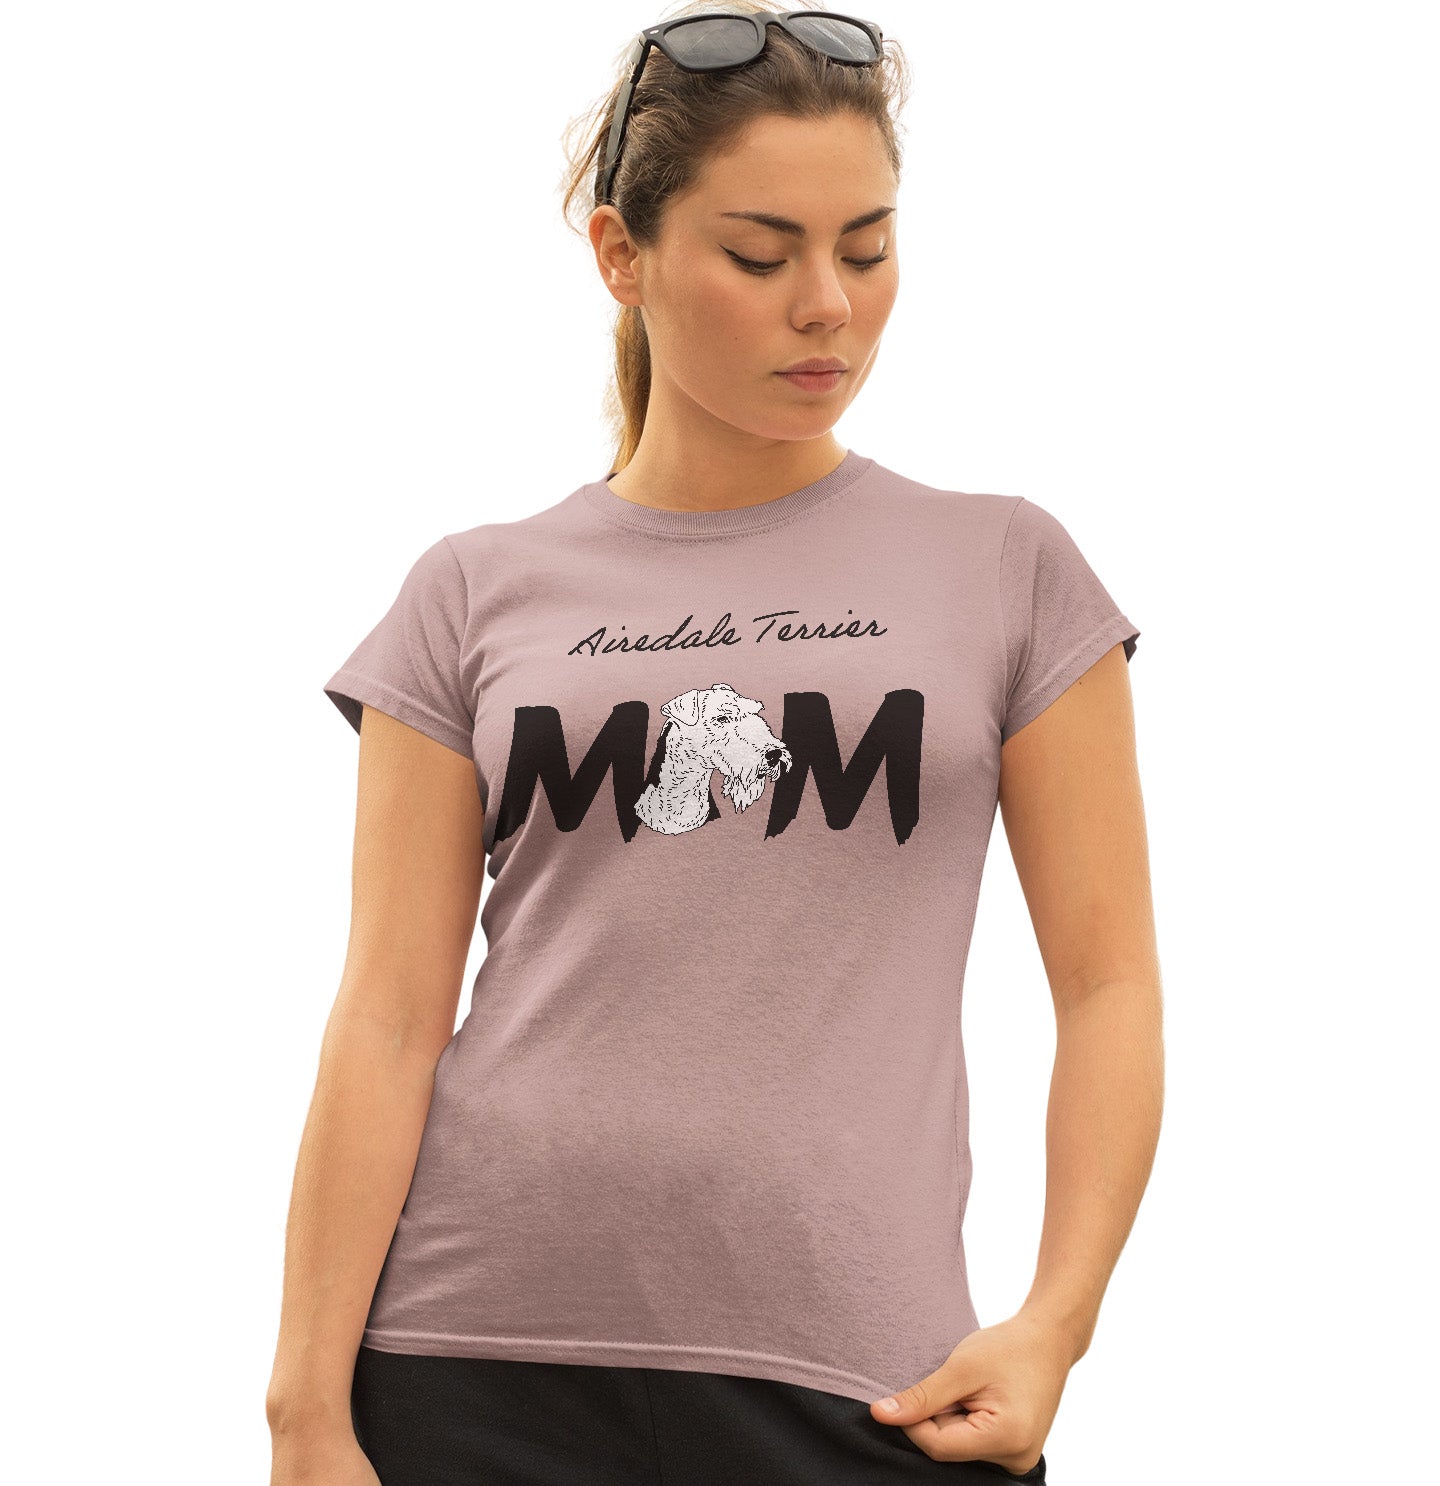 Airedale Terrier Breed Mom - Women's Fitted T-Shirt